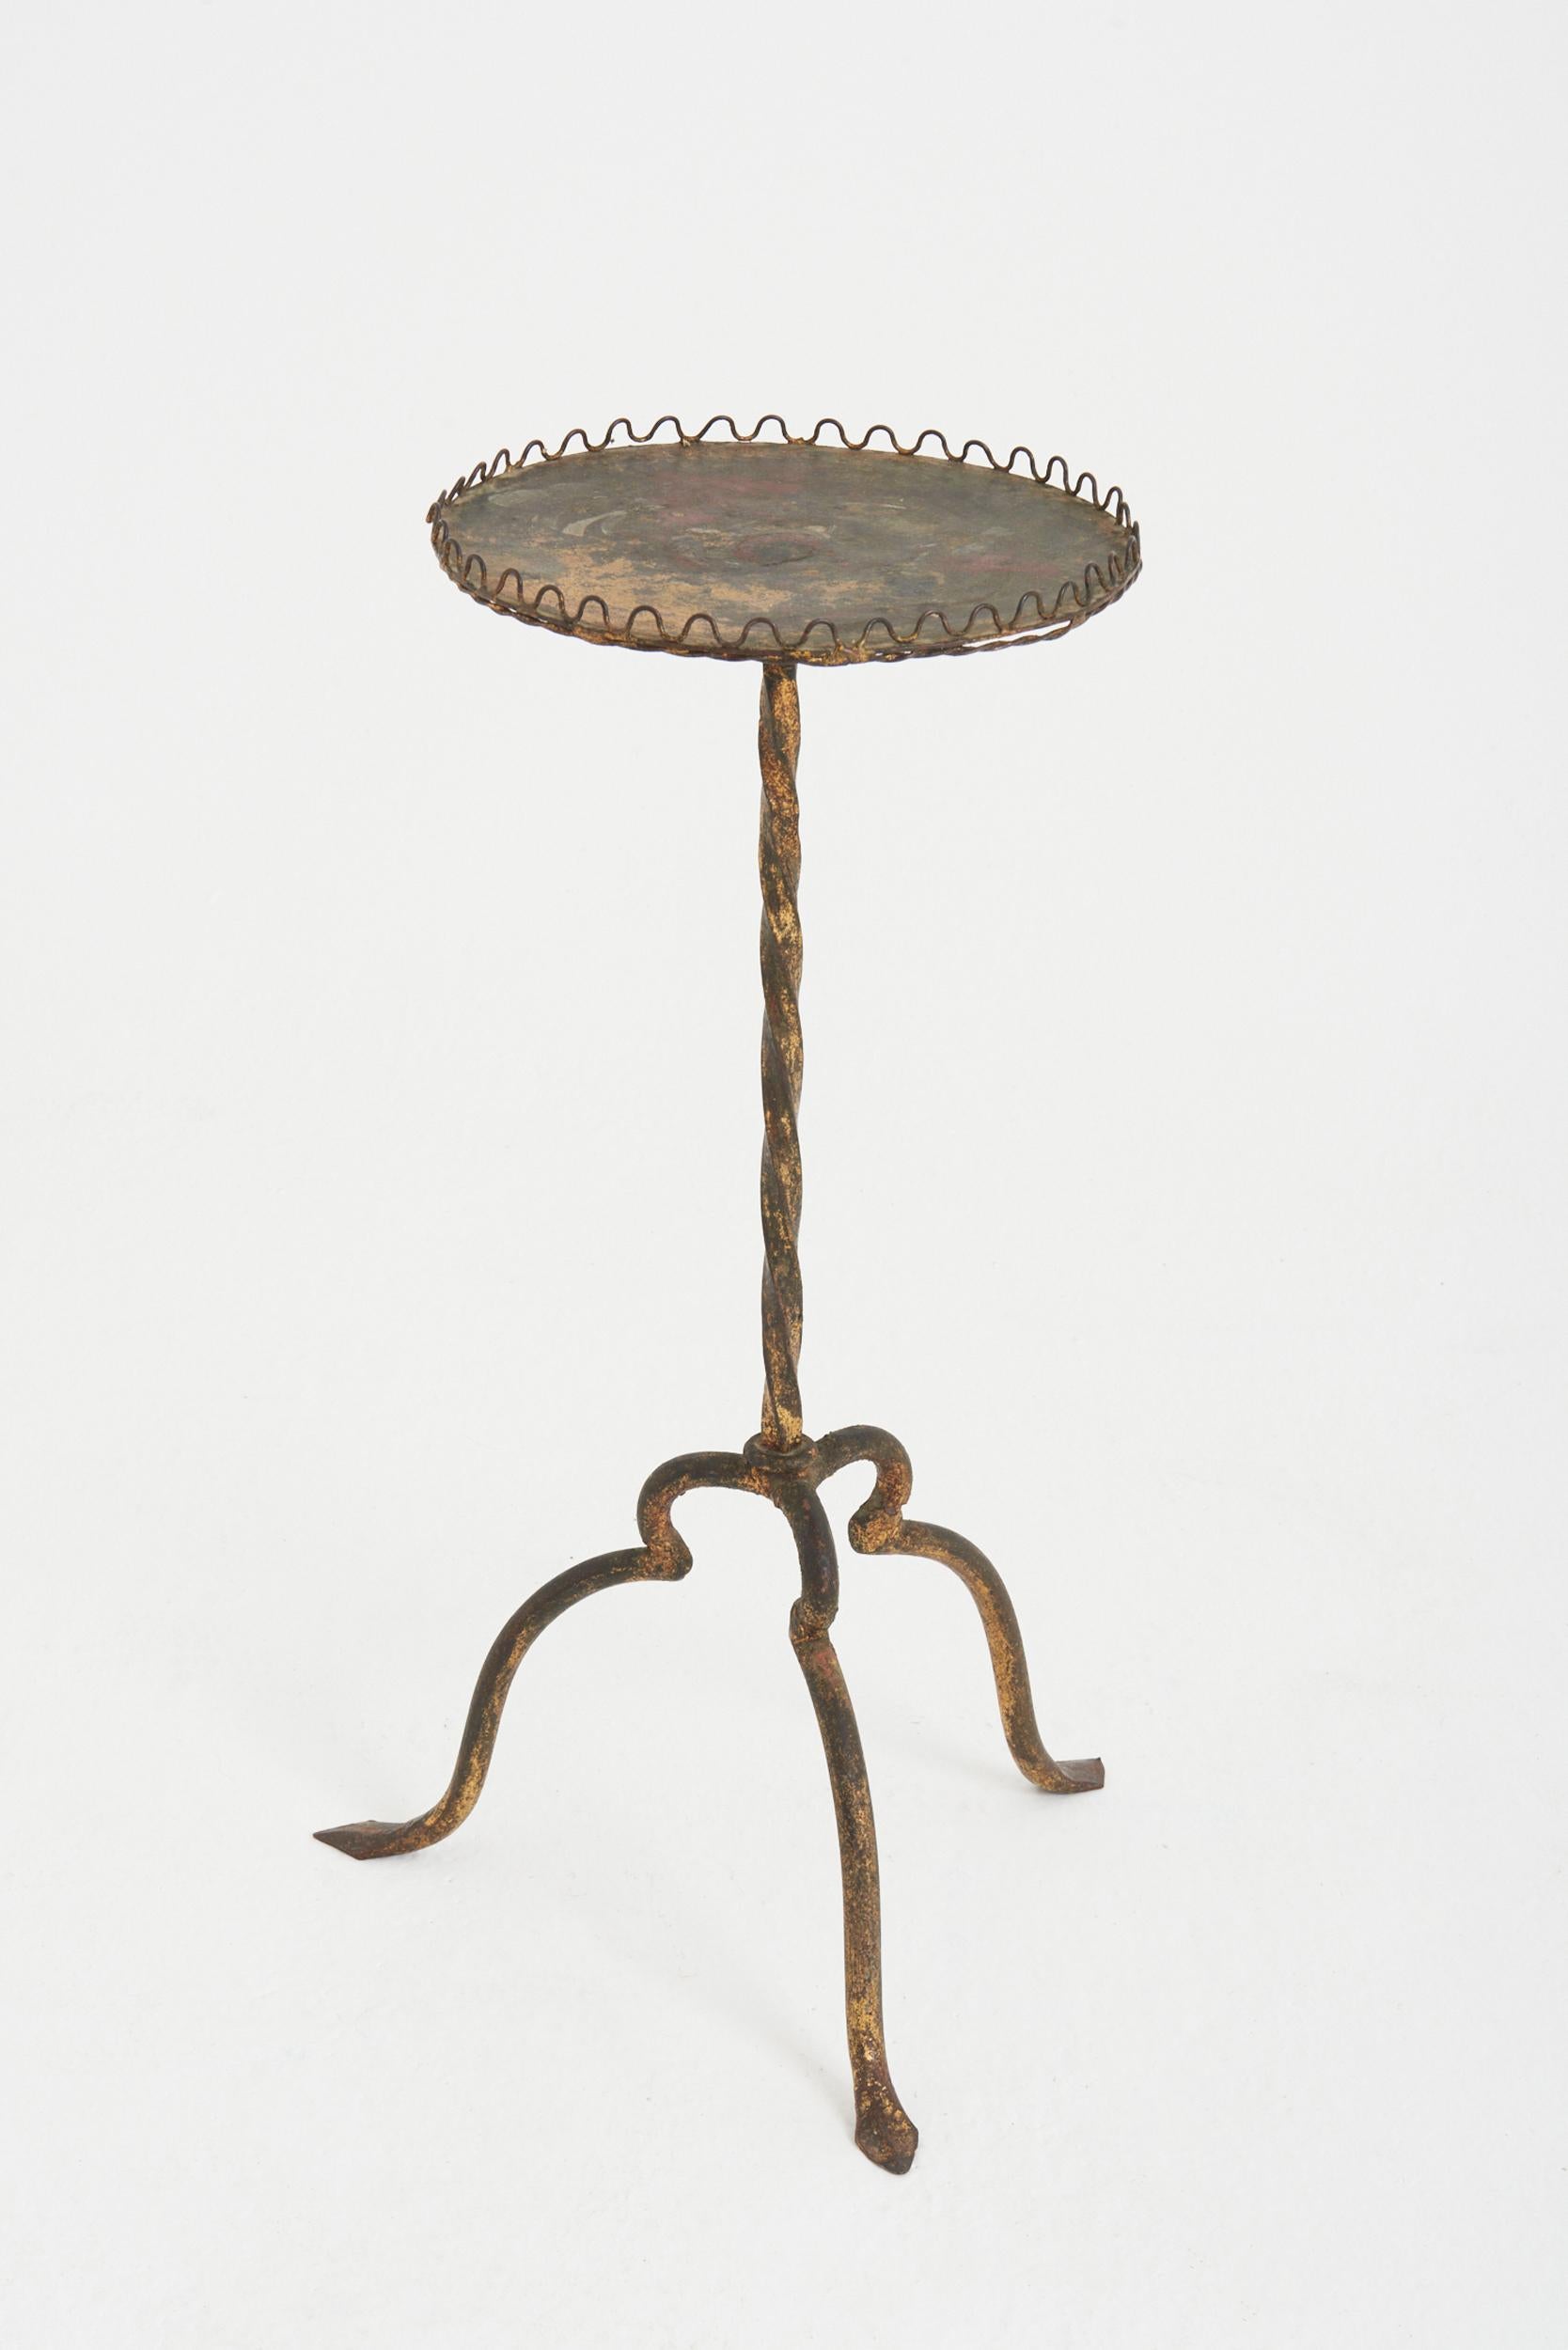 A gilt and wrought iron martini table.
Spain, mid-20th century
59.5 cm high by 25 cm diameter.